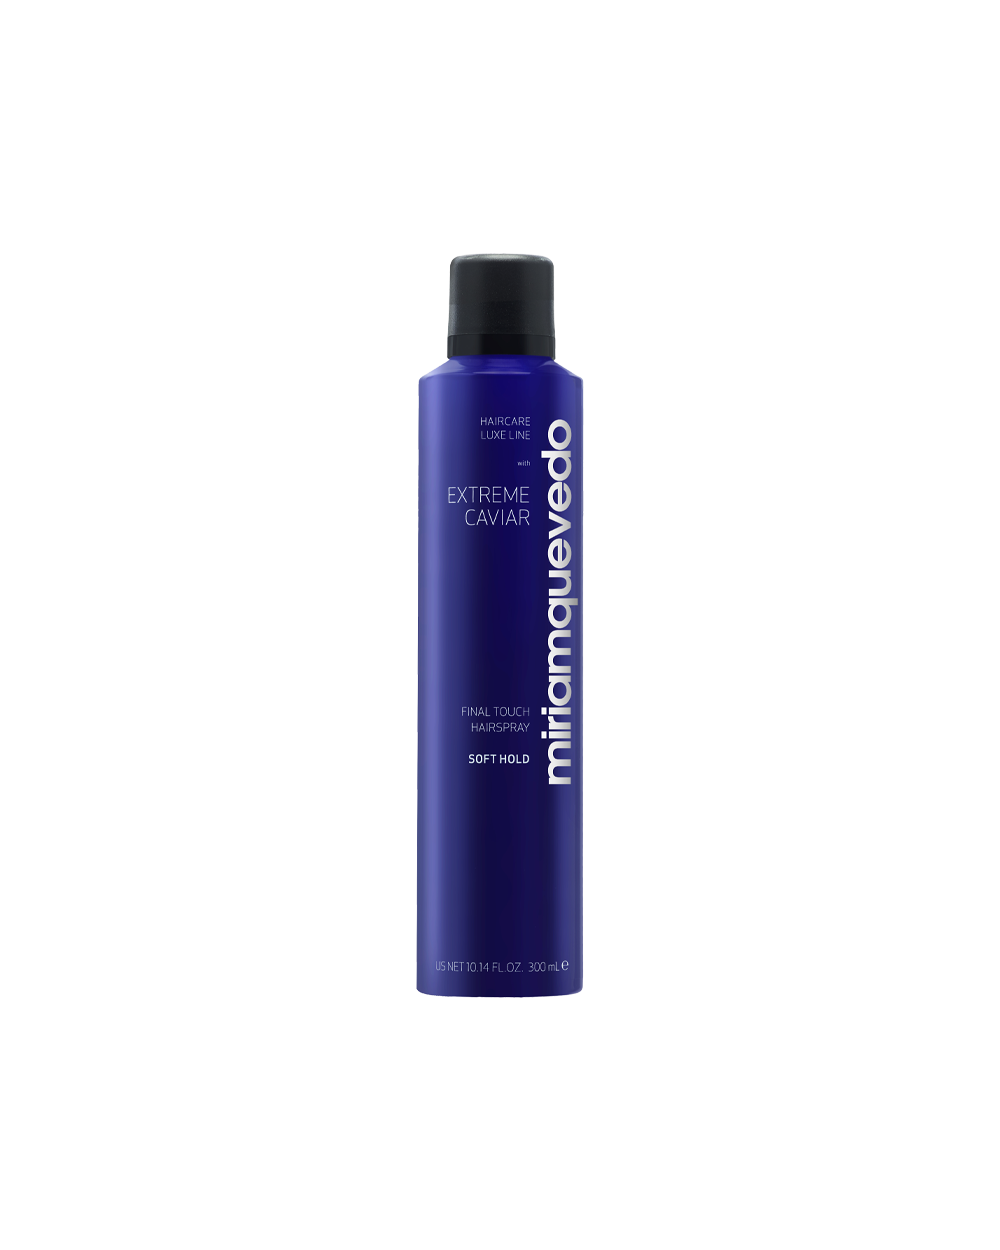 EXTREME CAVIAR FINAL TOUCH HAIRSPRAY - SOFT HOLD